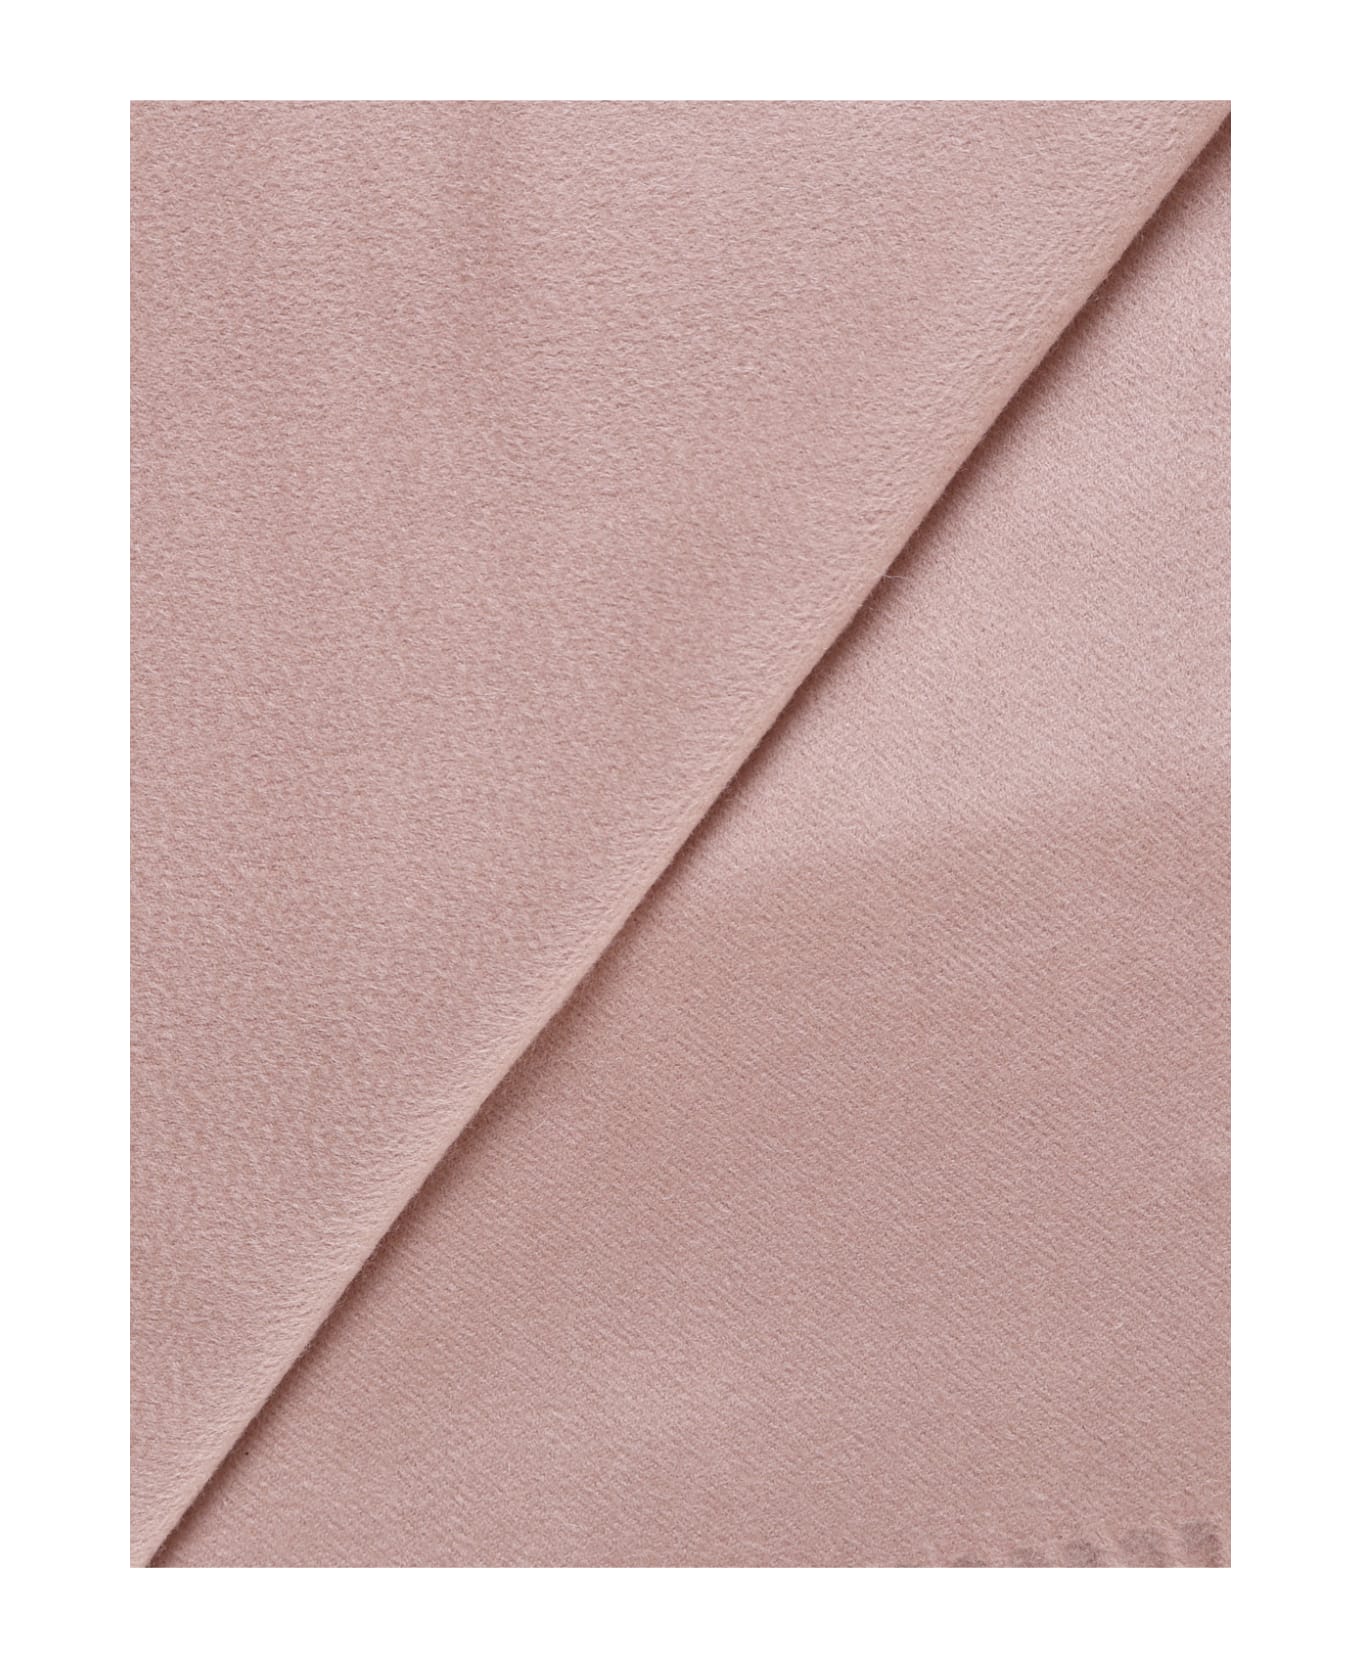 Max Mara Stole In Pure Sable Cashmere - Pink